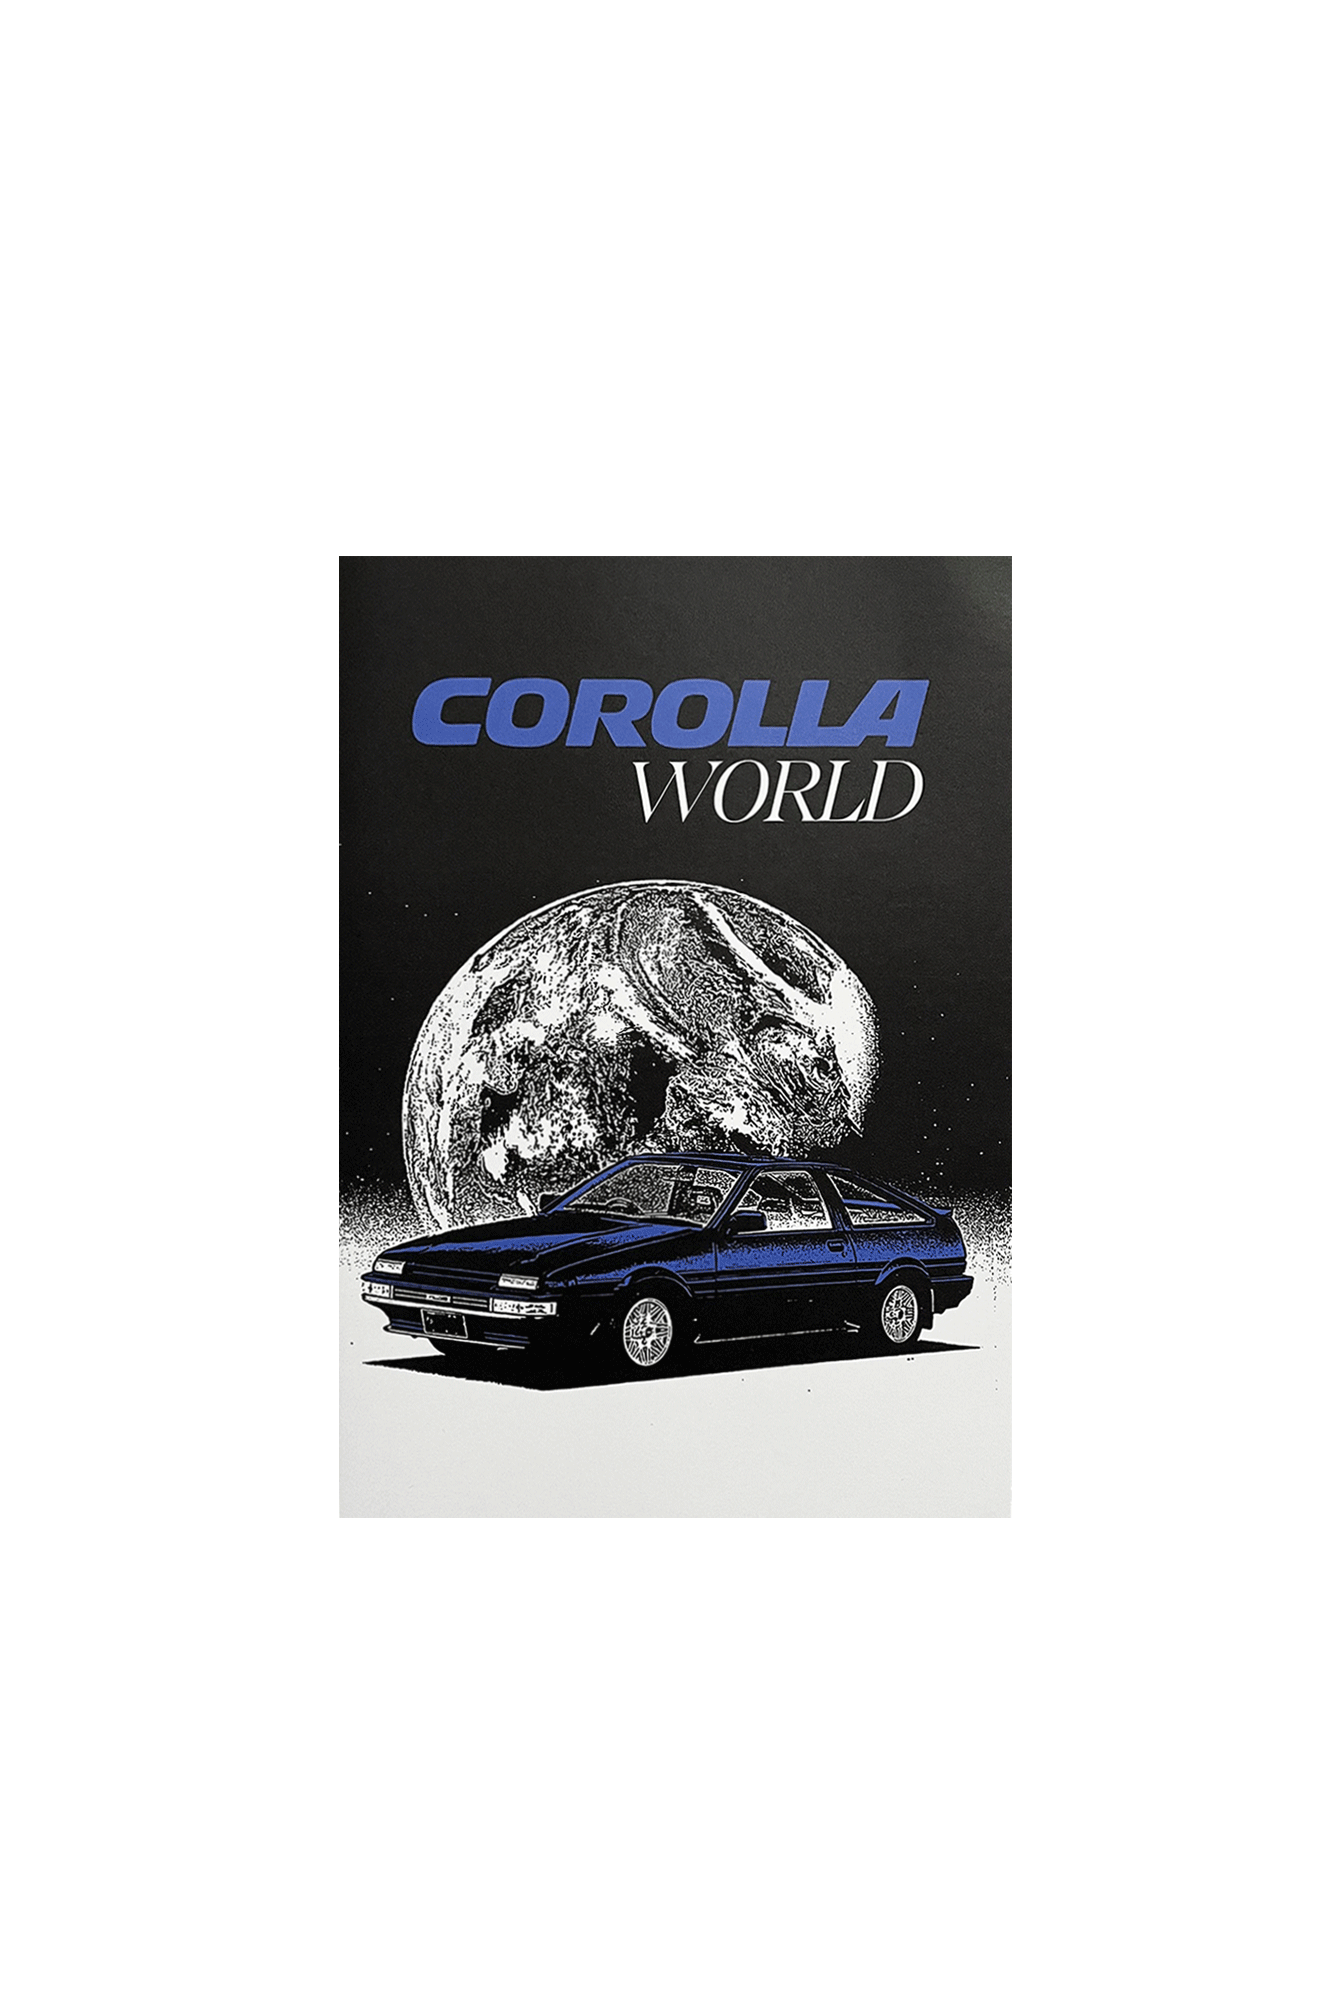 Corolla World by Chris Loutfy